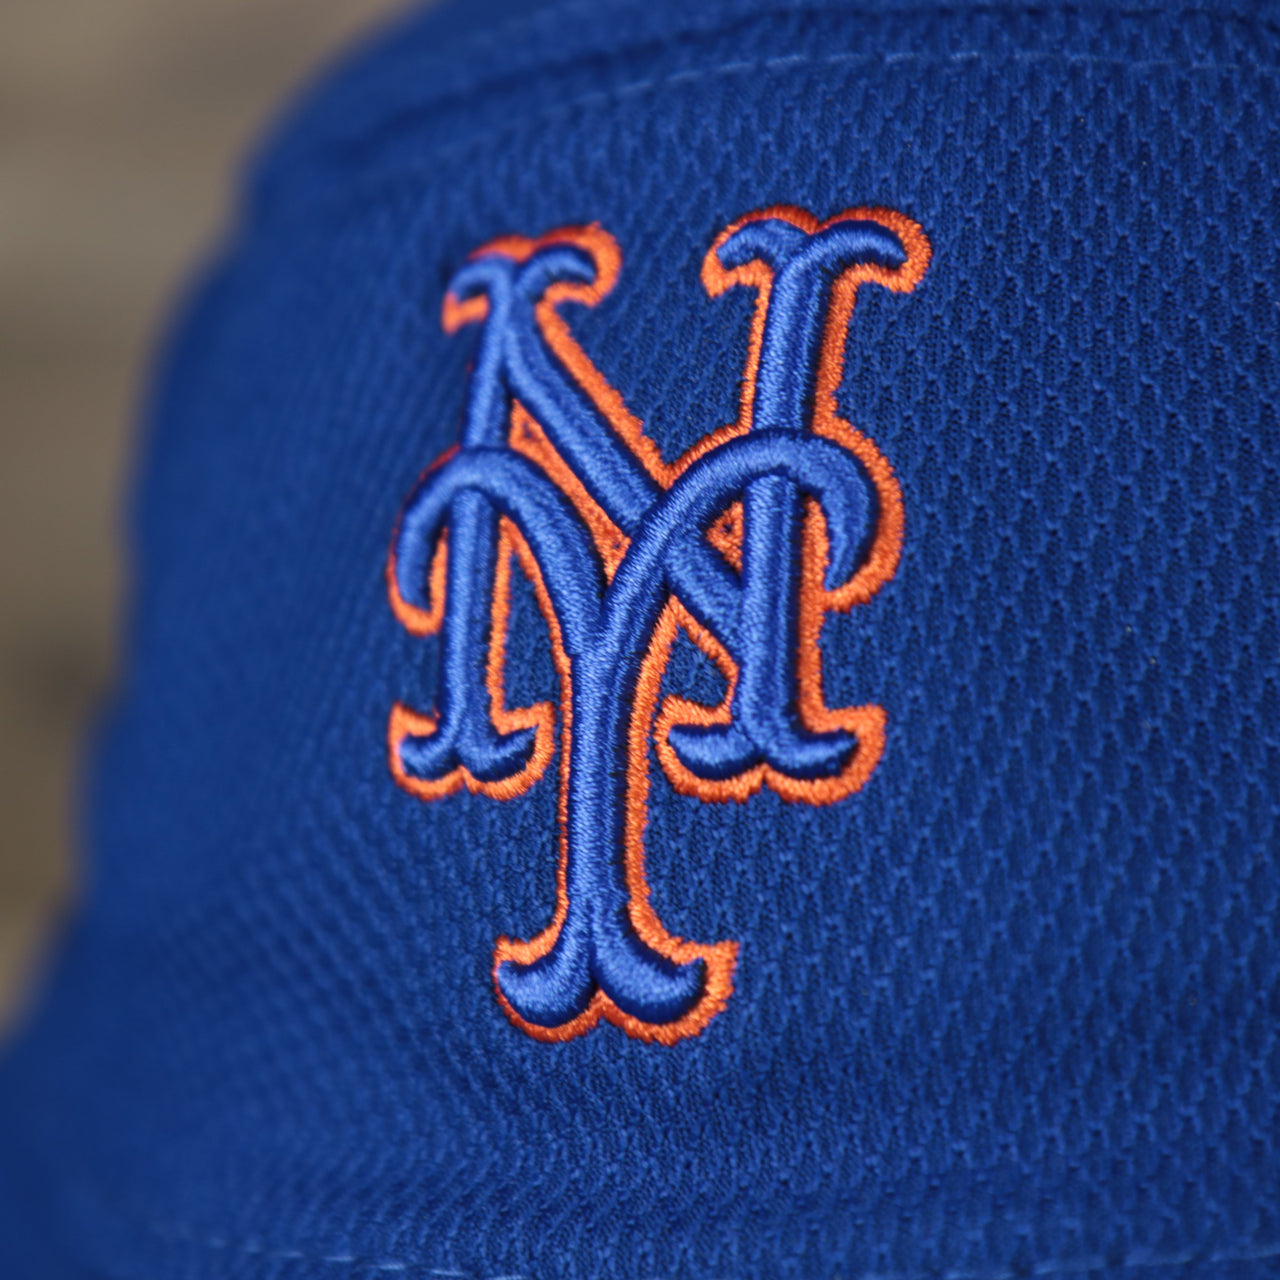 A close up of the Mets logo on the New York Mets  MLB 2022 Spring Training Onfield Bucket Hat